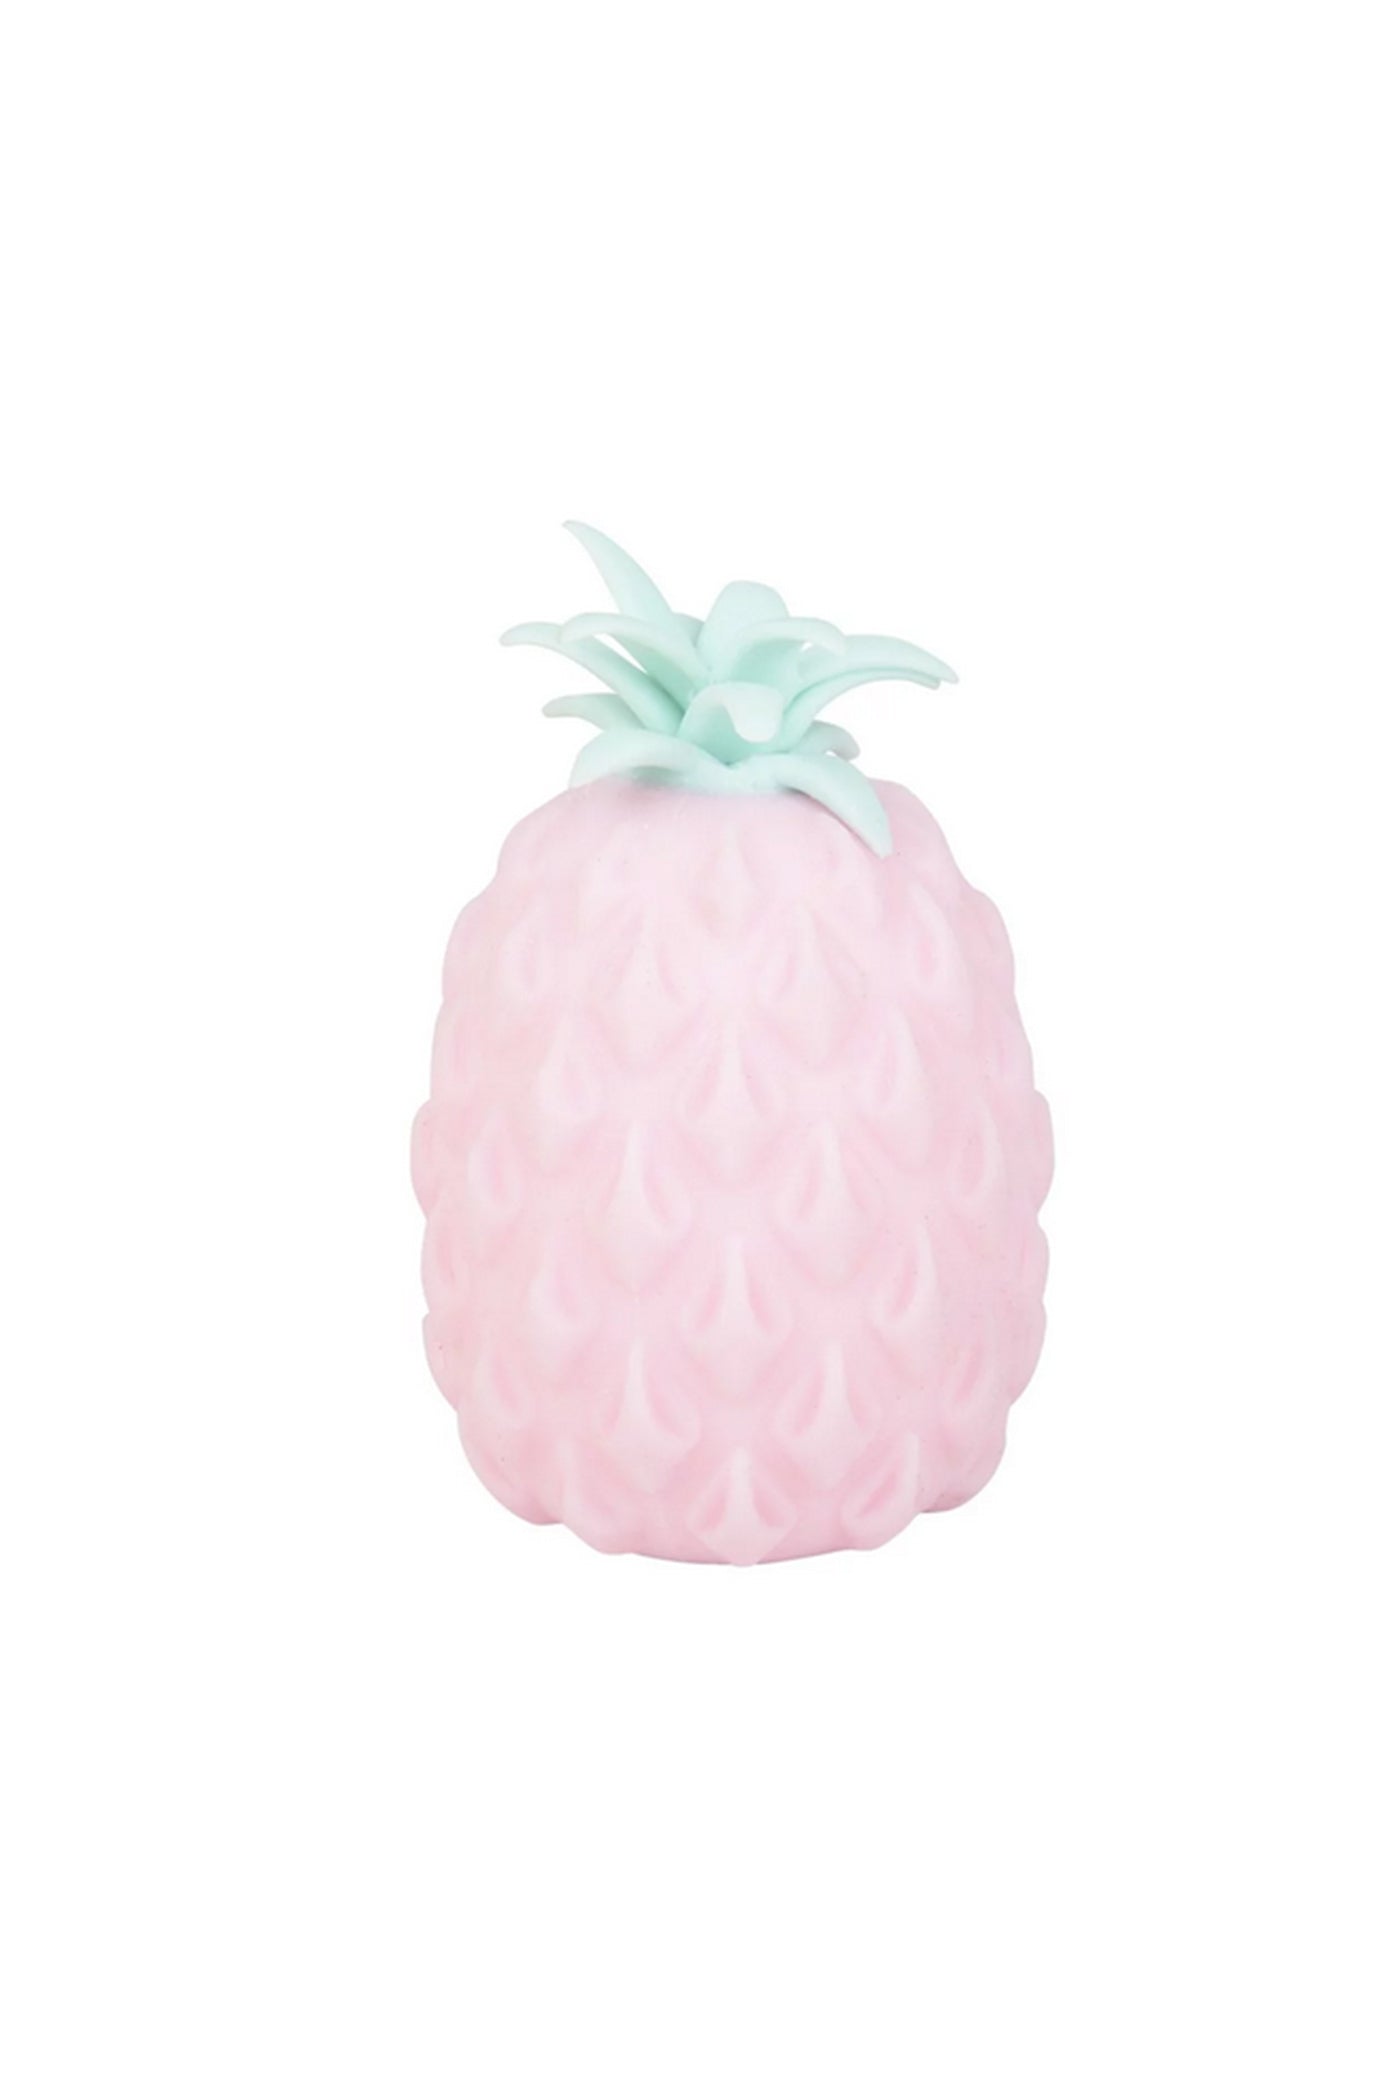 Squish And Stretch Pineapple Toy